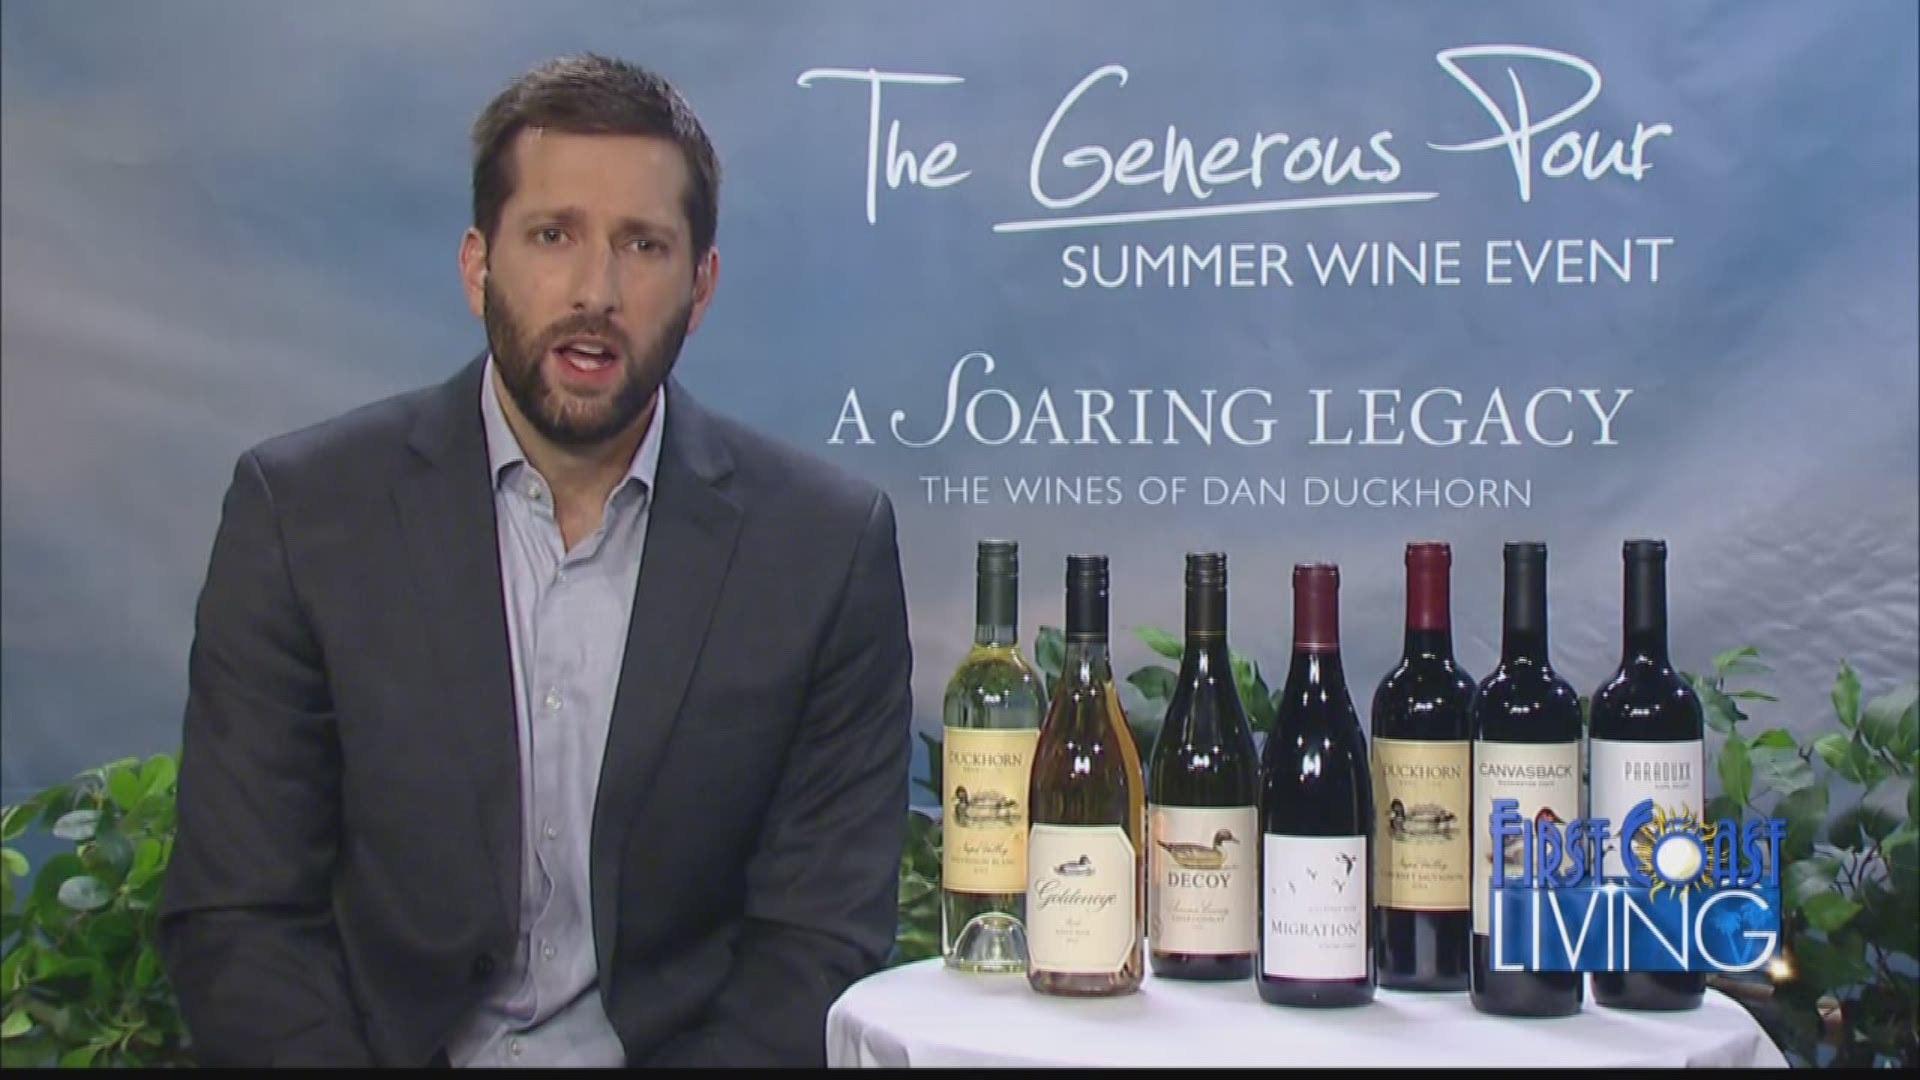 Advanced Sommelier Brian Phillips teaches us how to select the perfect wine